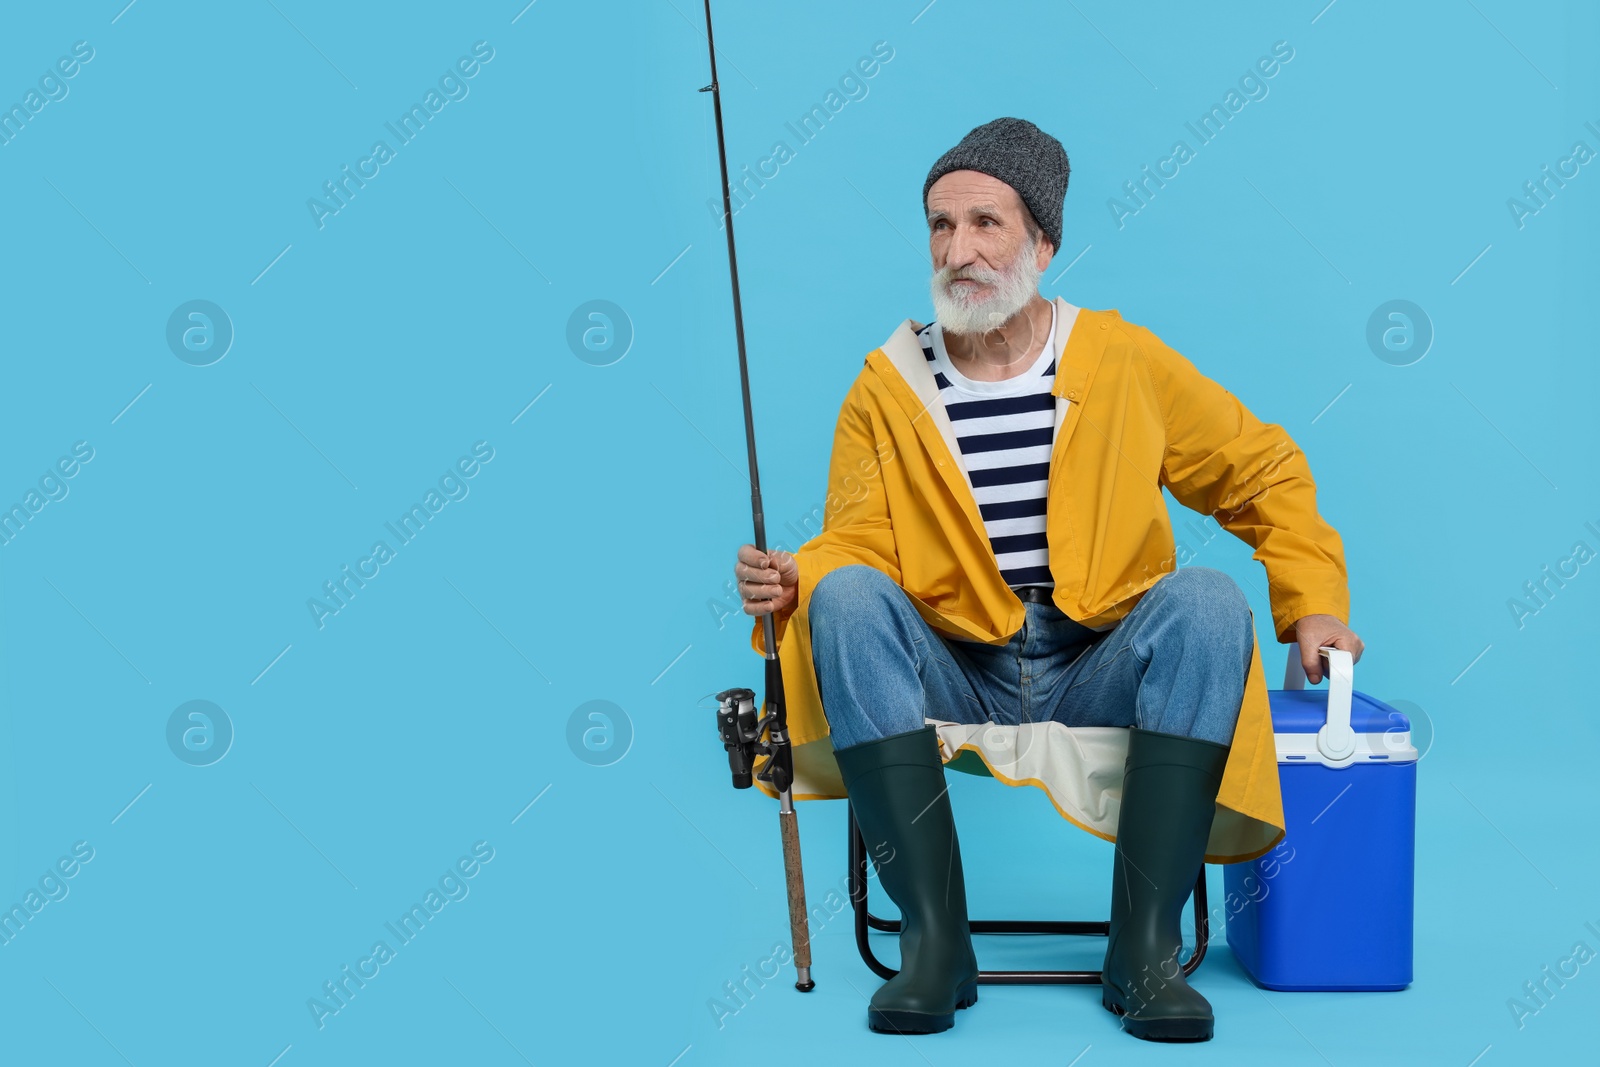 Photo of Fisherman with rod and cool box on chair against light blue background, space for text